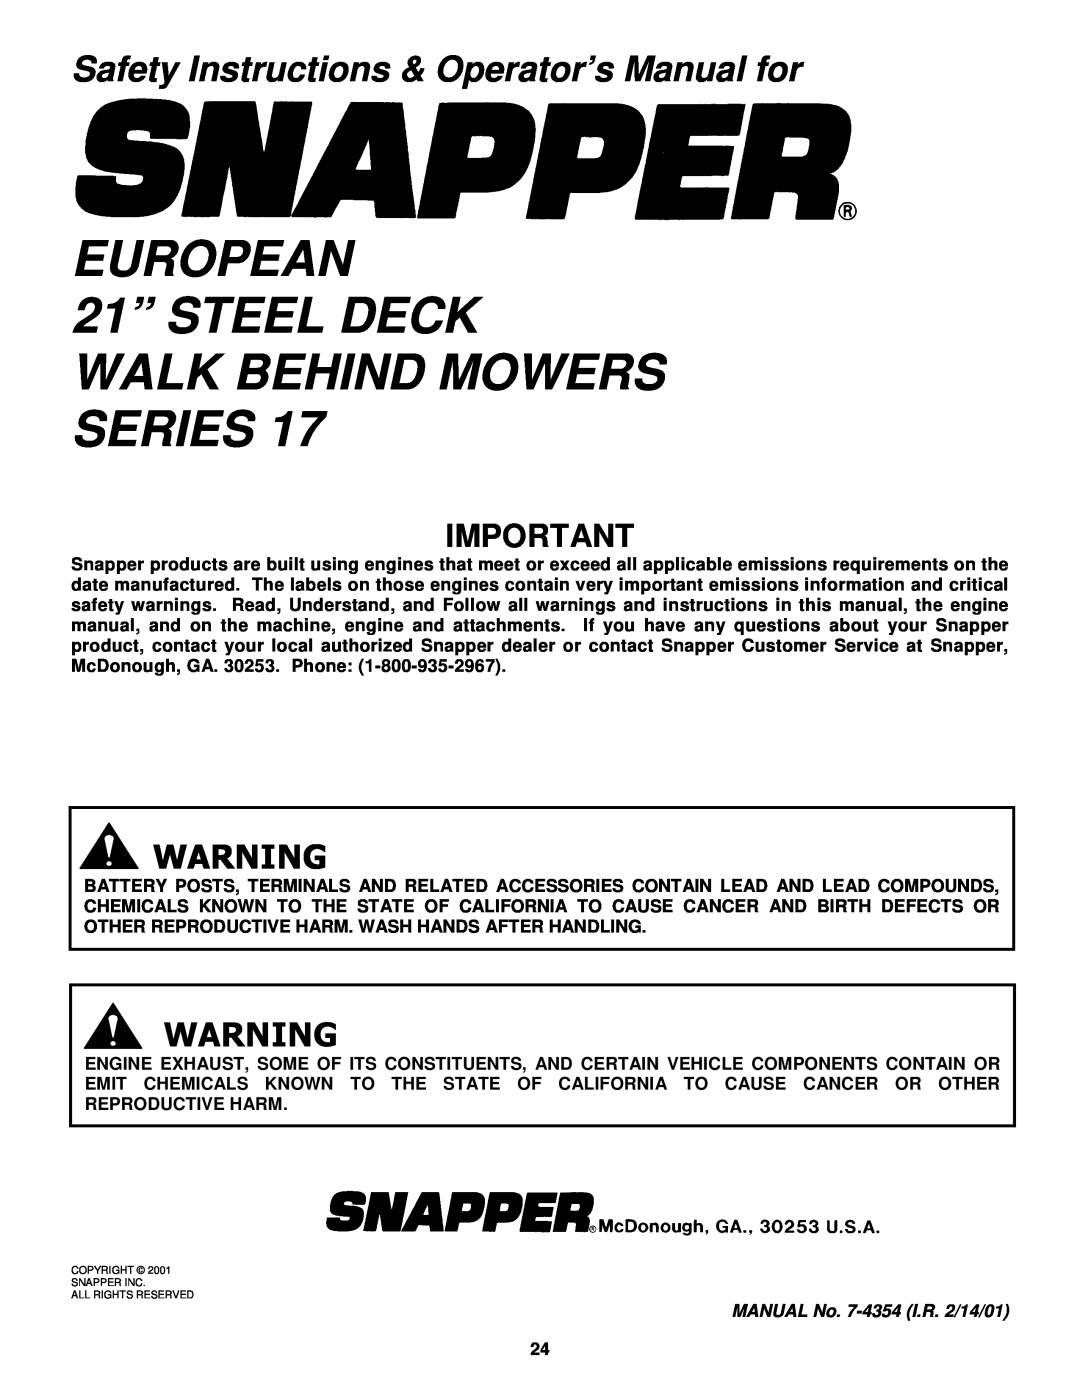 Snapper EP2167517BV EUROPEAN 21” STEEL DECK WALK BEHIND MOWERS SERIES, Safety Instructions & Operator’s Manual for 